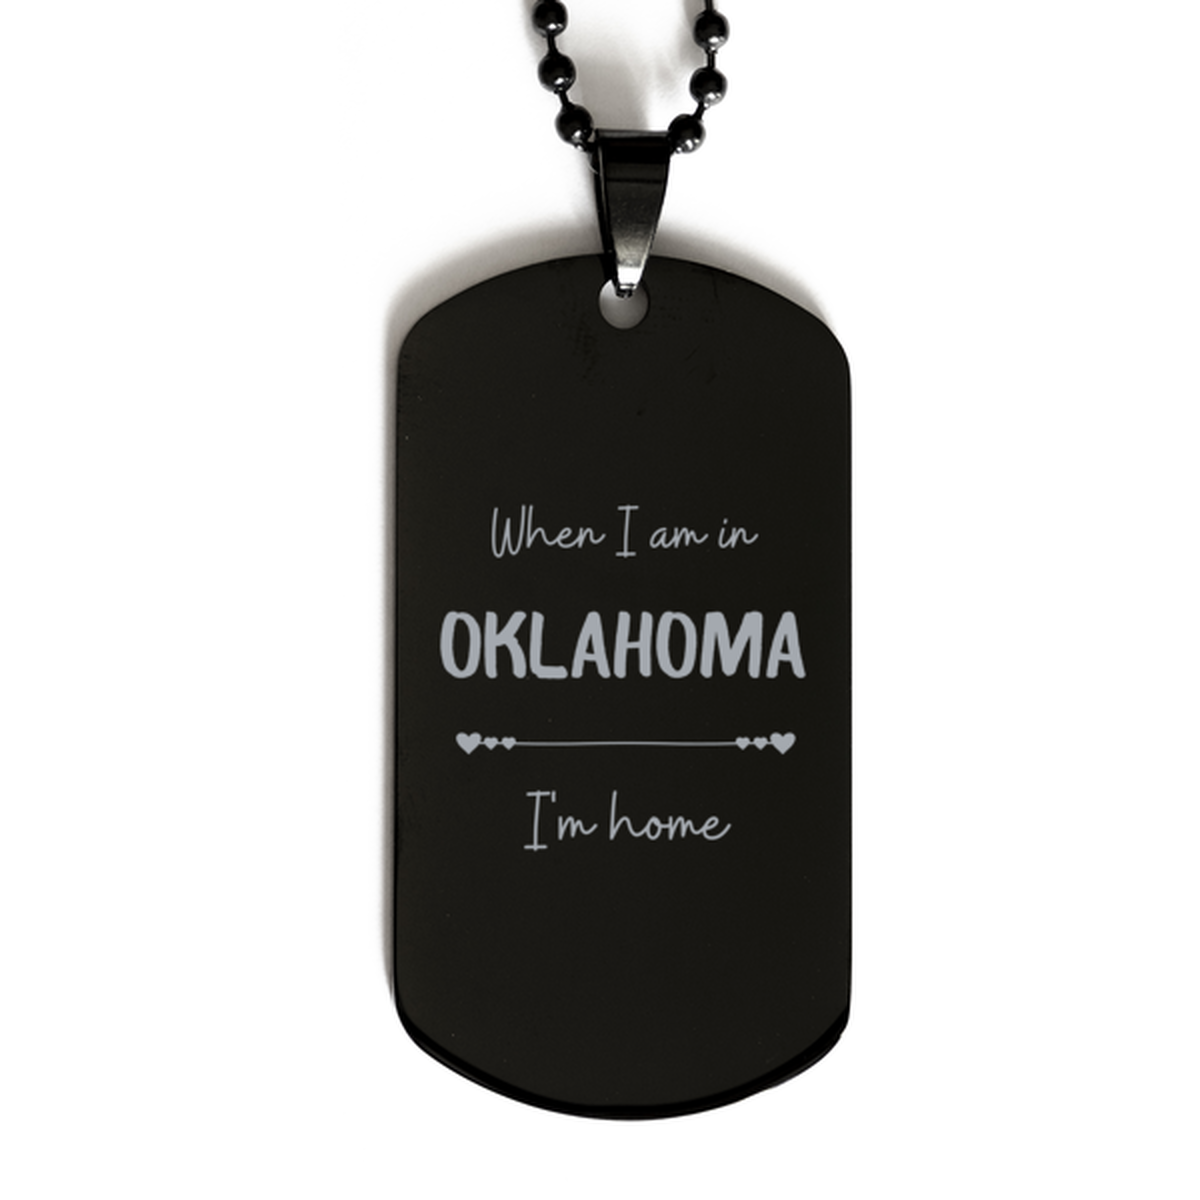 When I am in Oklahoma I'm home Black Dog Tag, Cheap Gifts For Oklahoma, State Oklahoma Birthday Gifts for Friends Coworker